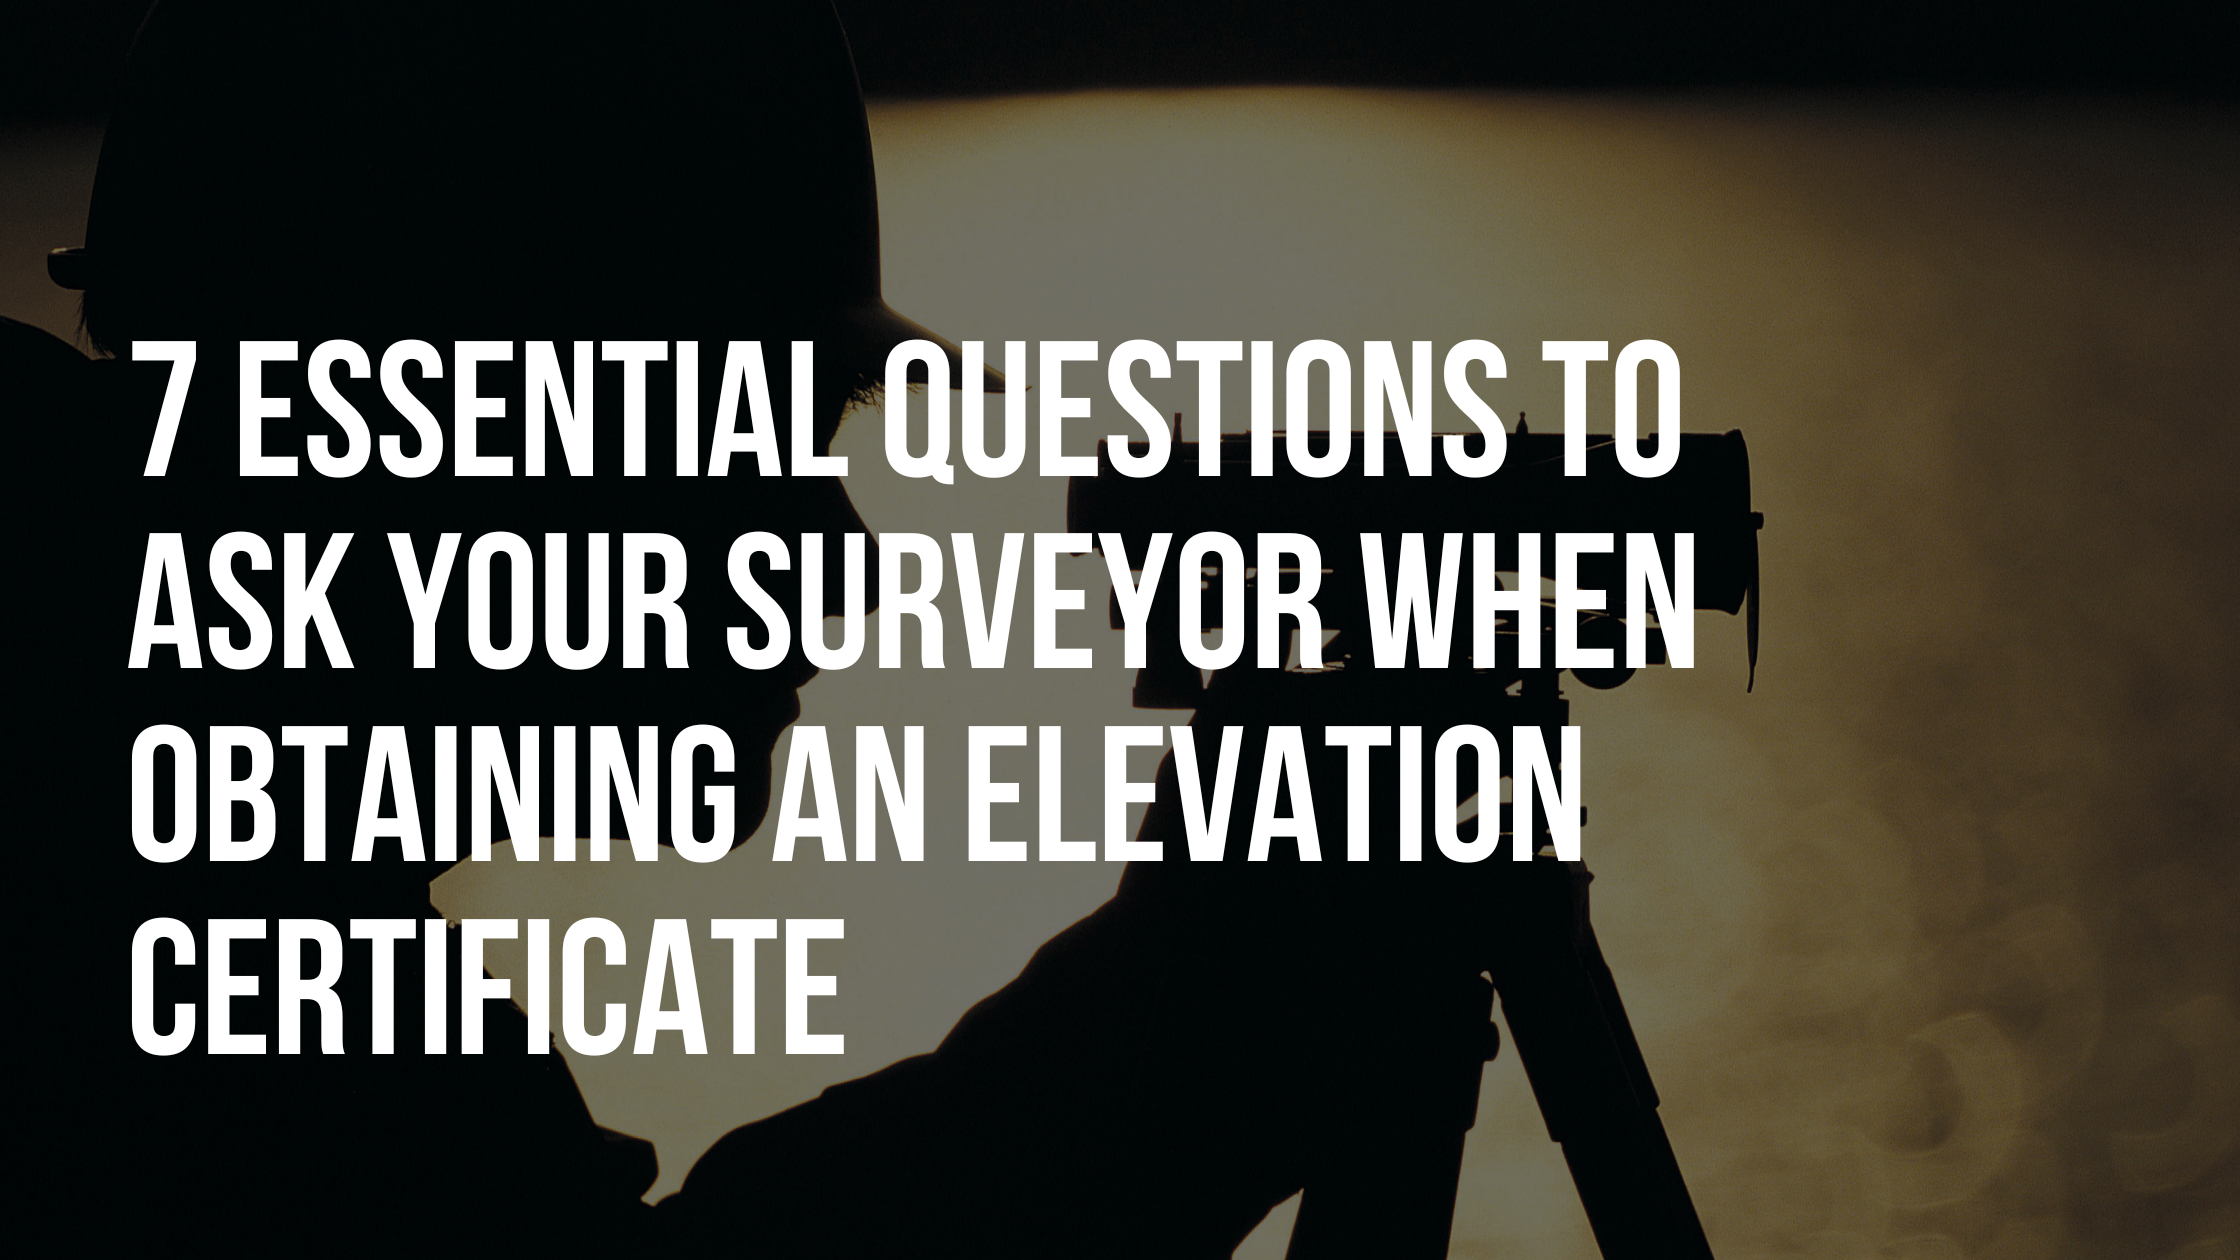 7 Essential Questions to Ask Your Surveyor When Obtaining an Elevation Certificate